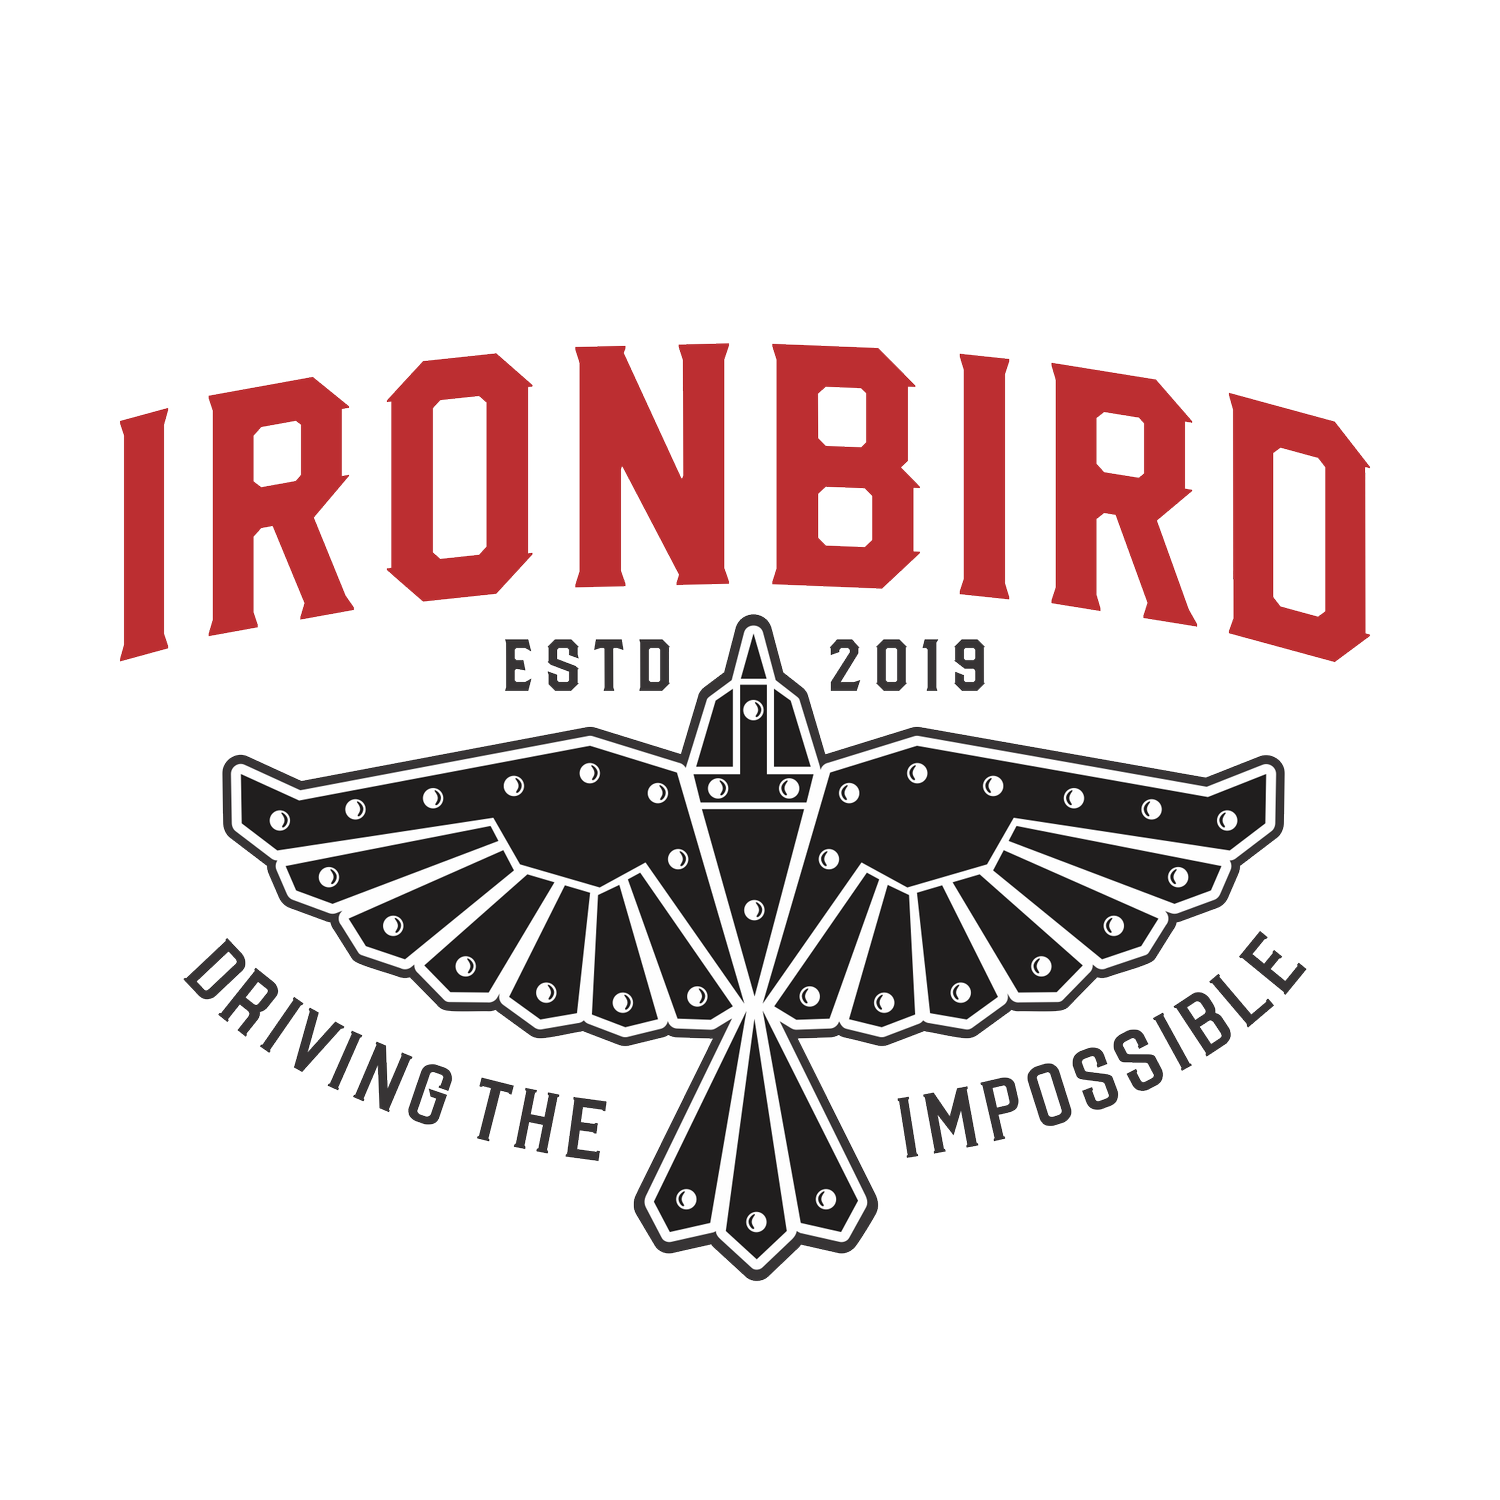 Iron Bird - Connecting a community of the empowered.